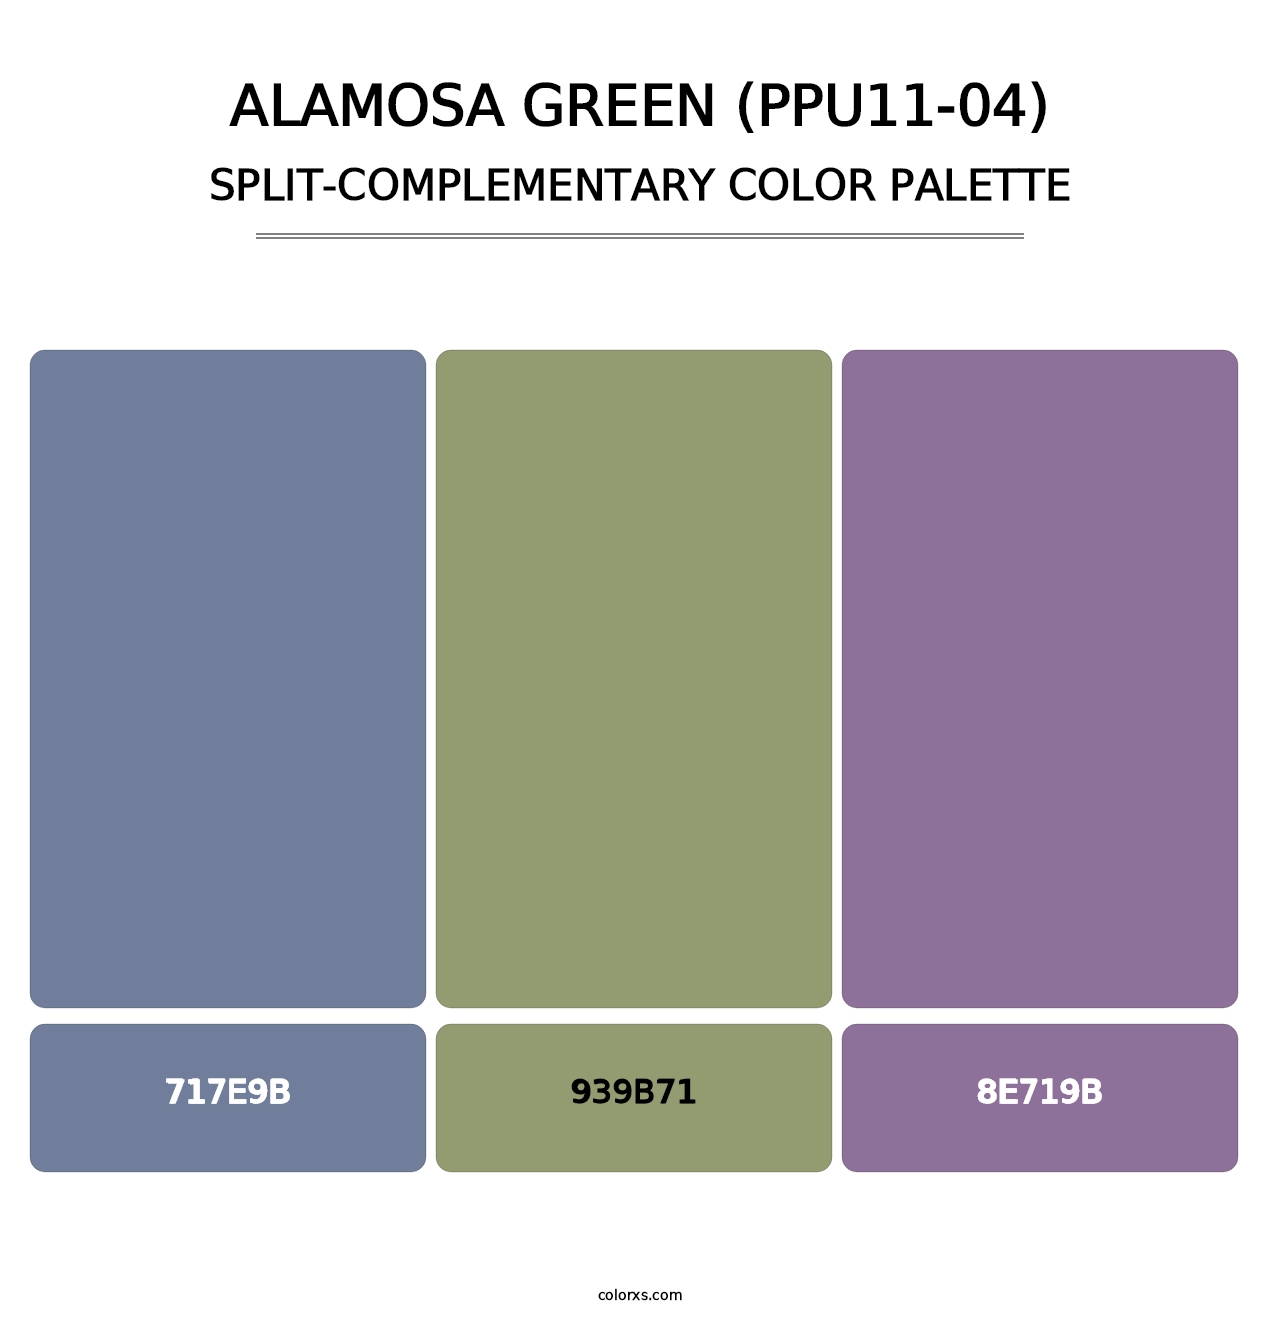 Alamosa Green (PPU11-04) - Split-Complementary Color Palette